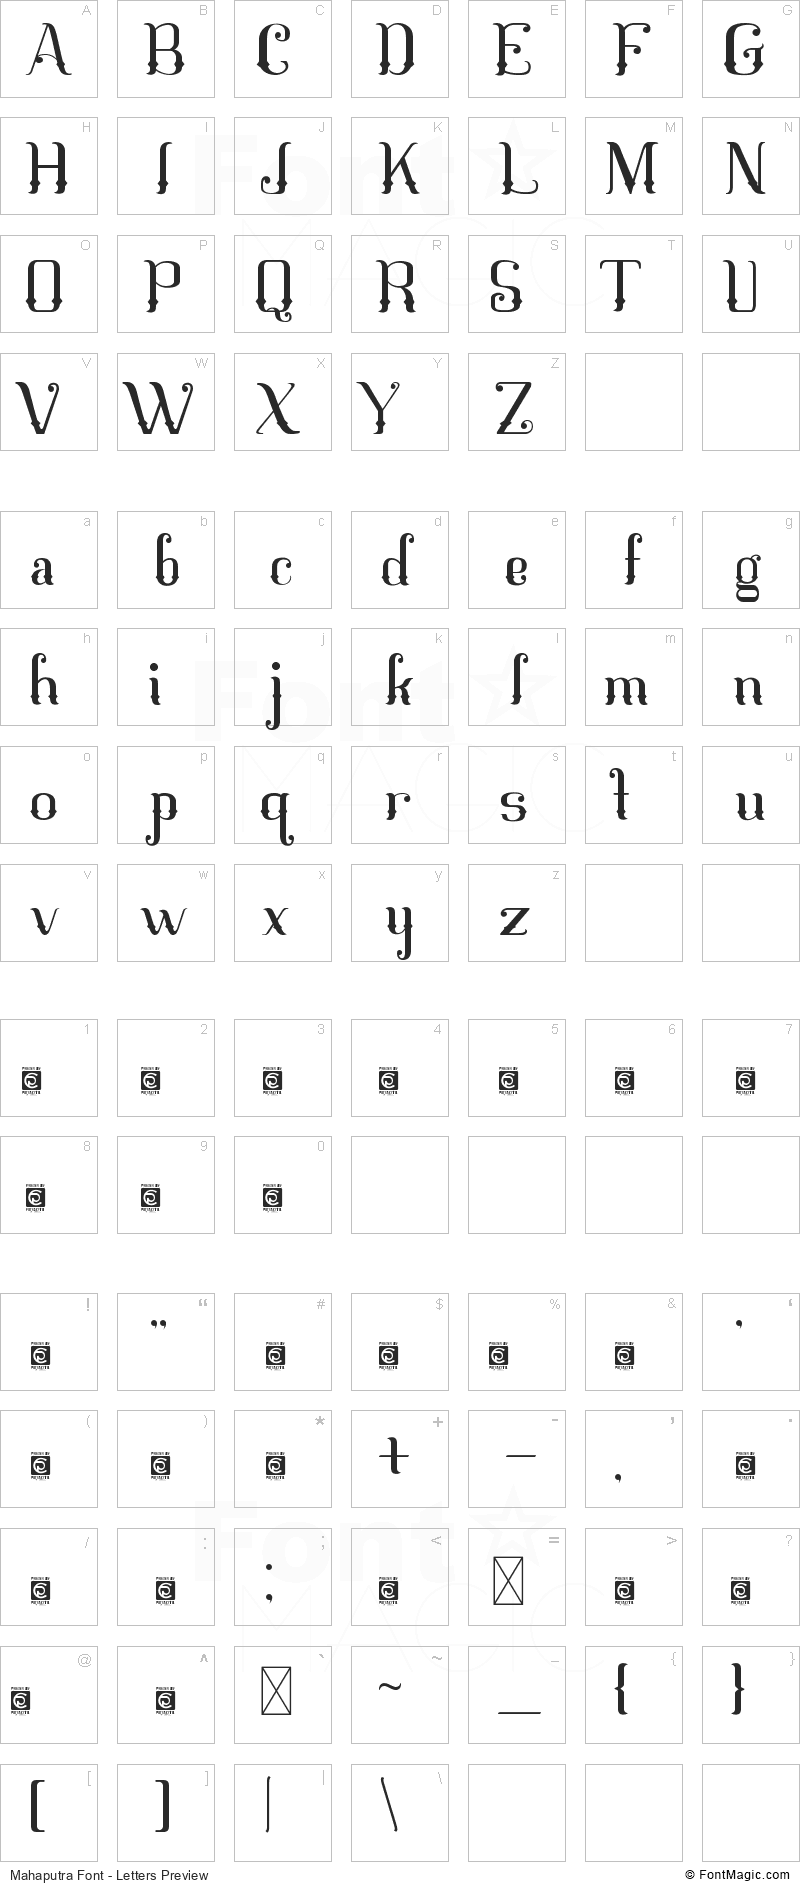 Mahaputra Font - All Latters Preview Chart